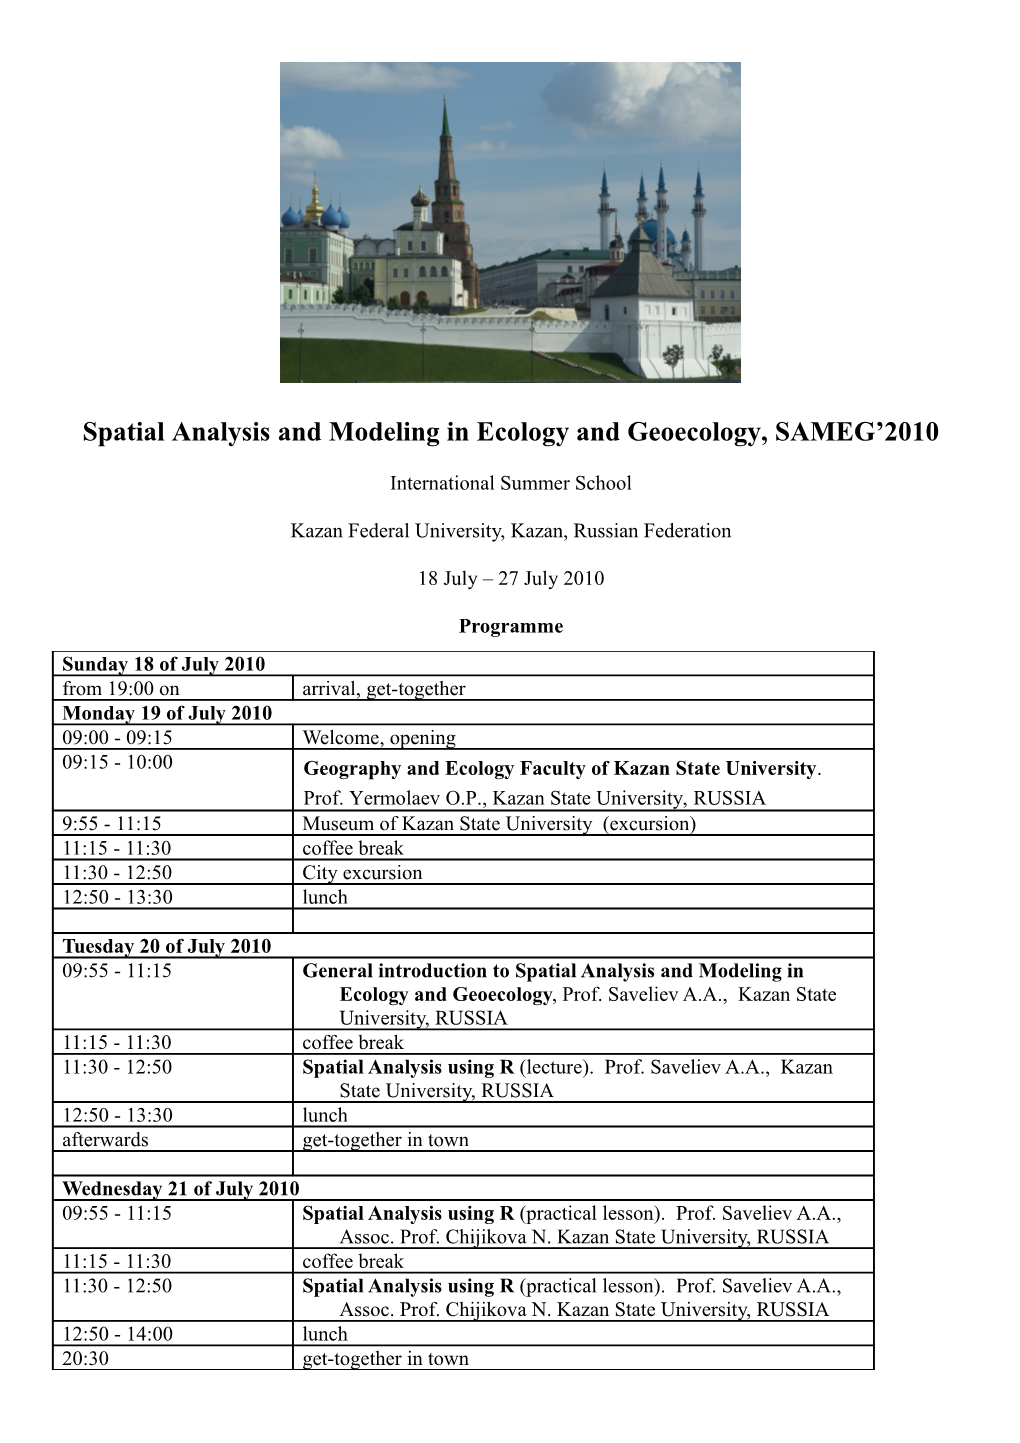 Spatial Analysis and Modeling in Ecology and Geoecology, SAMEG 2010